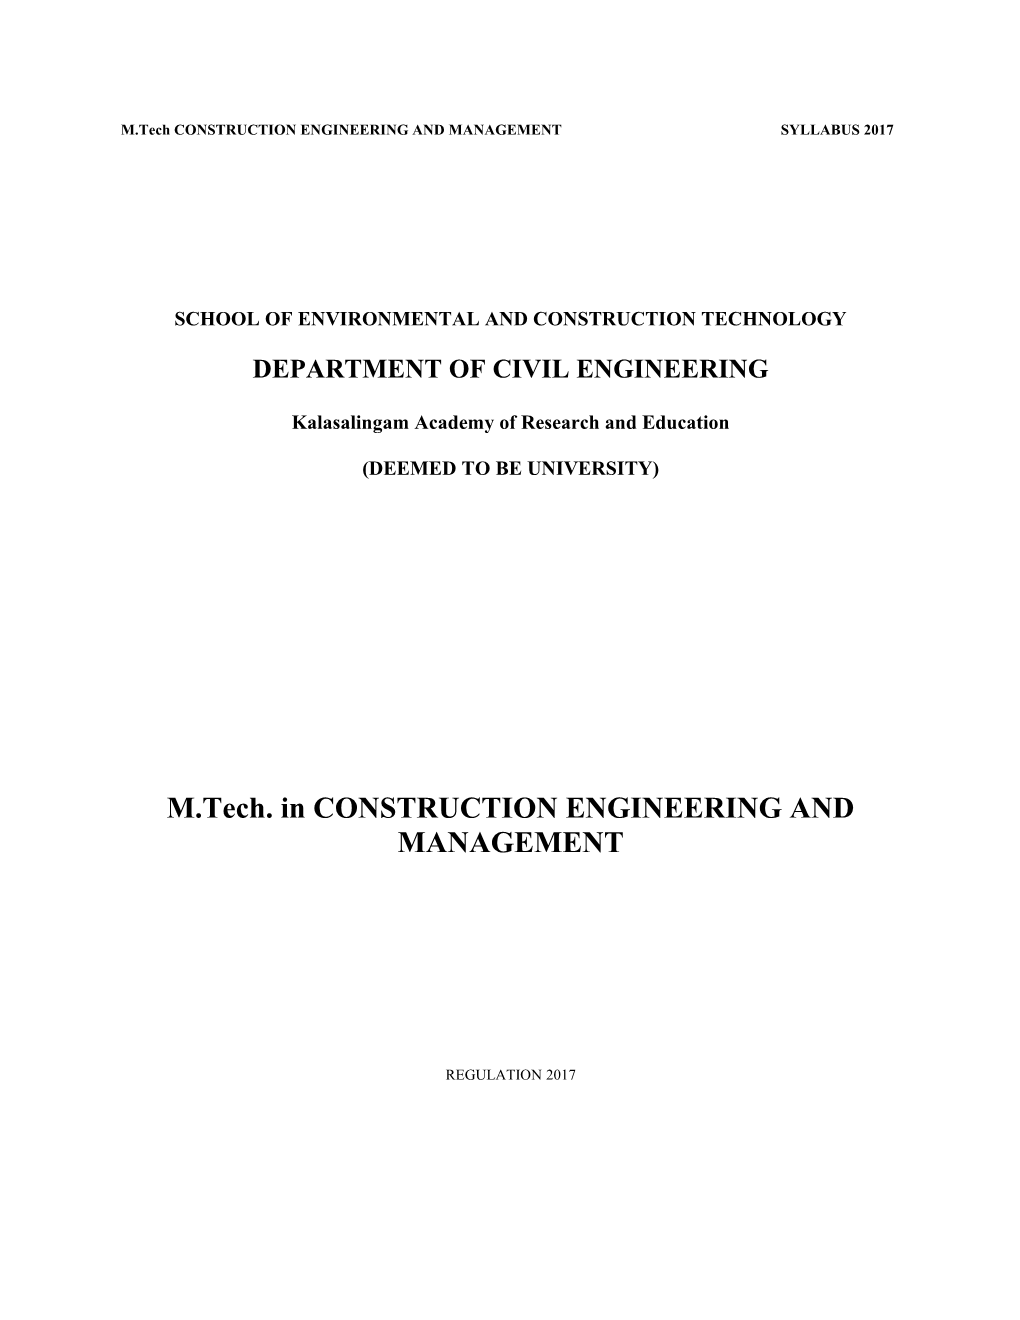 M.Tech CONSTRUCTION ENGINEERING and MANAGEMENT SYLLABUS 2017